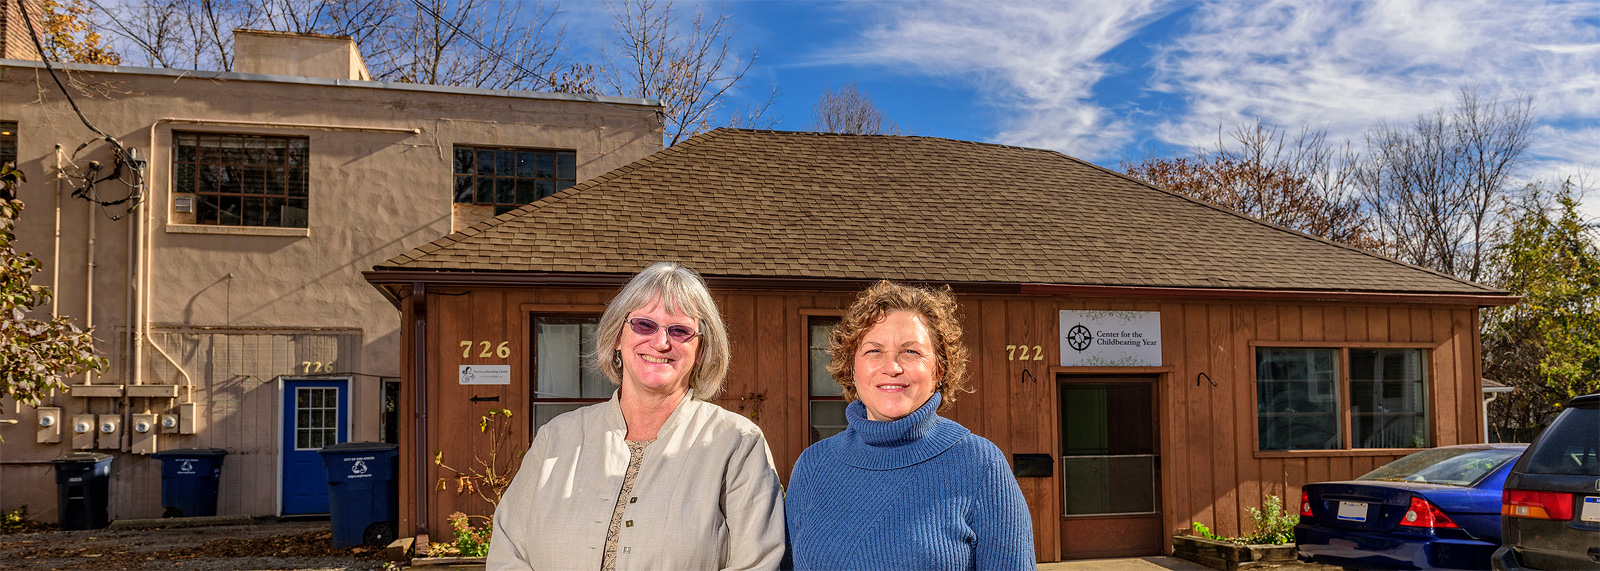 Patty Brennan and Merilynne Rush of After Death Home Care